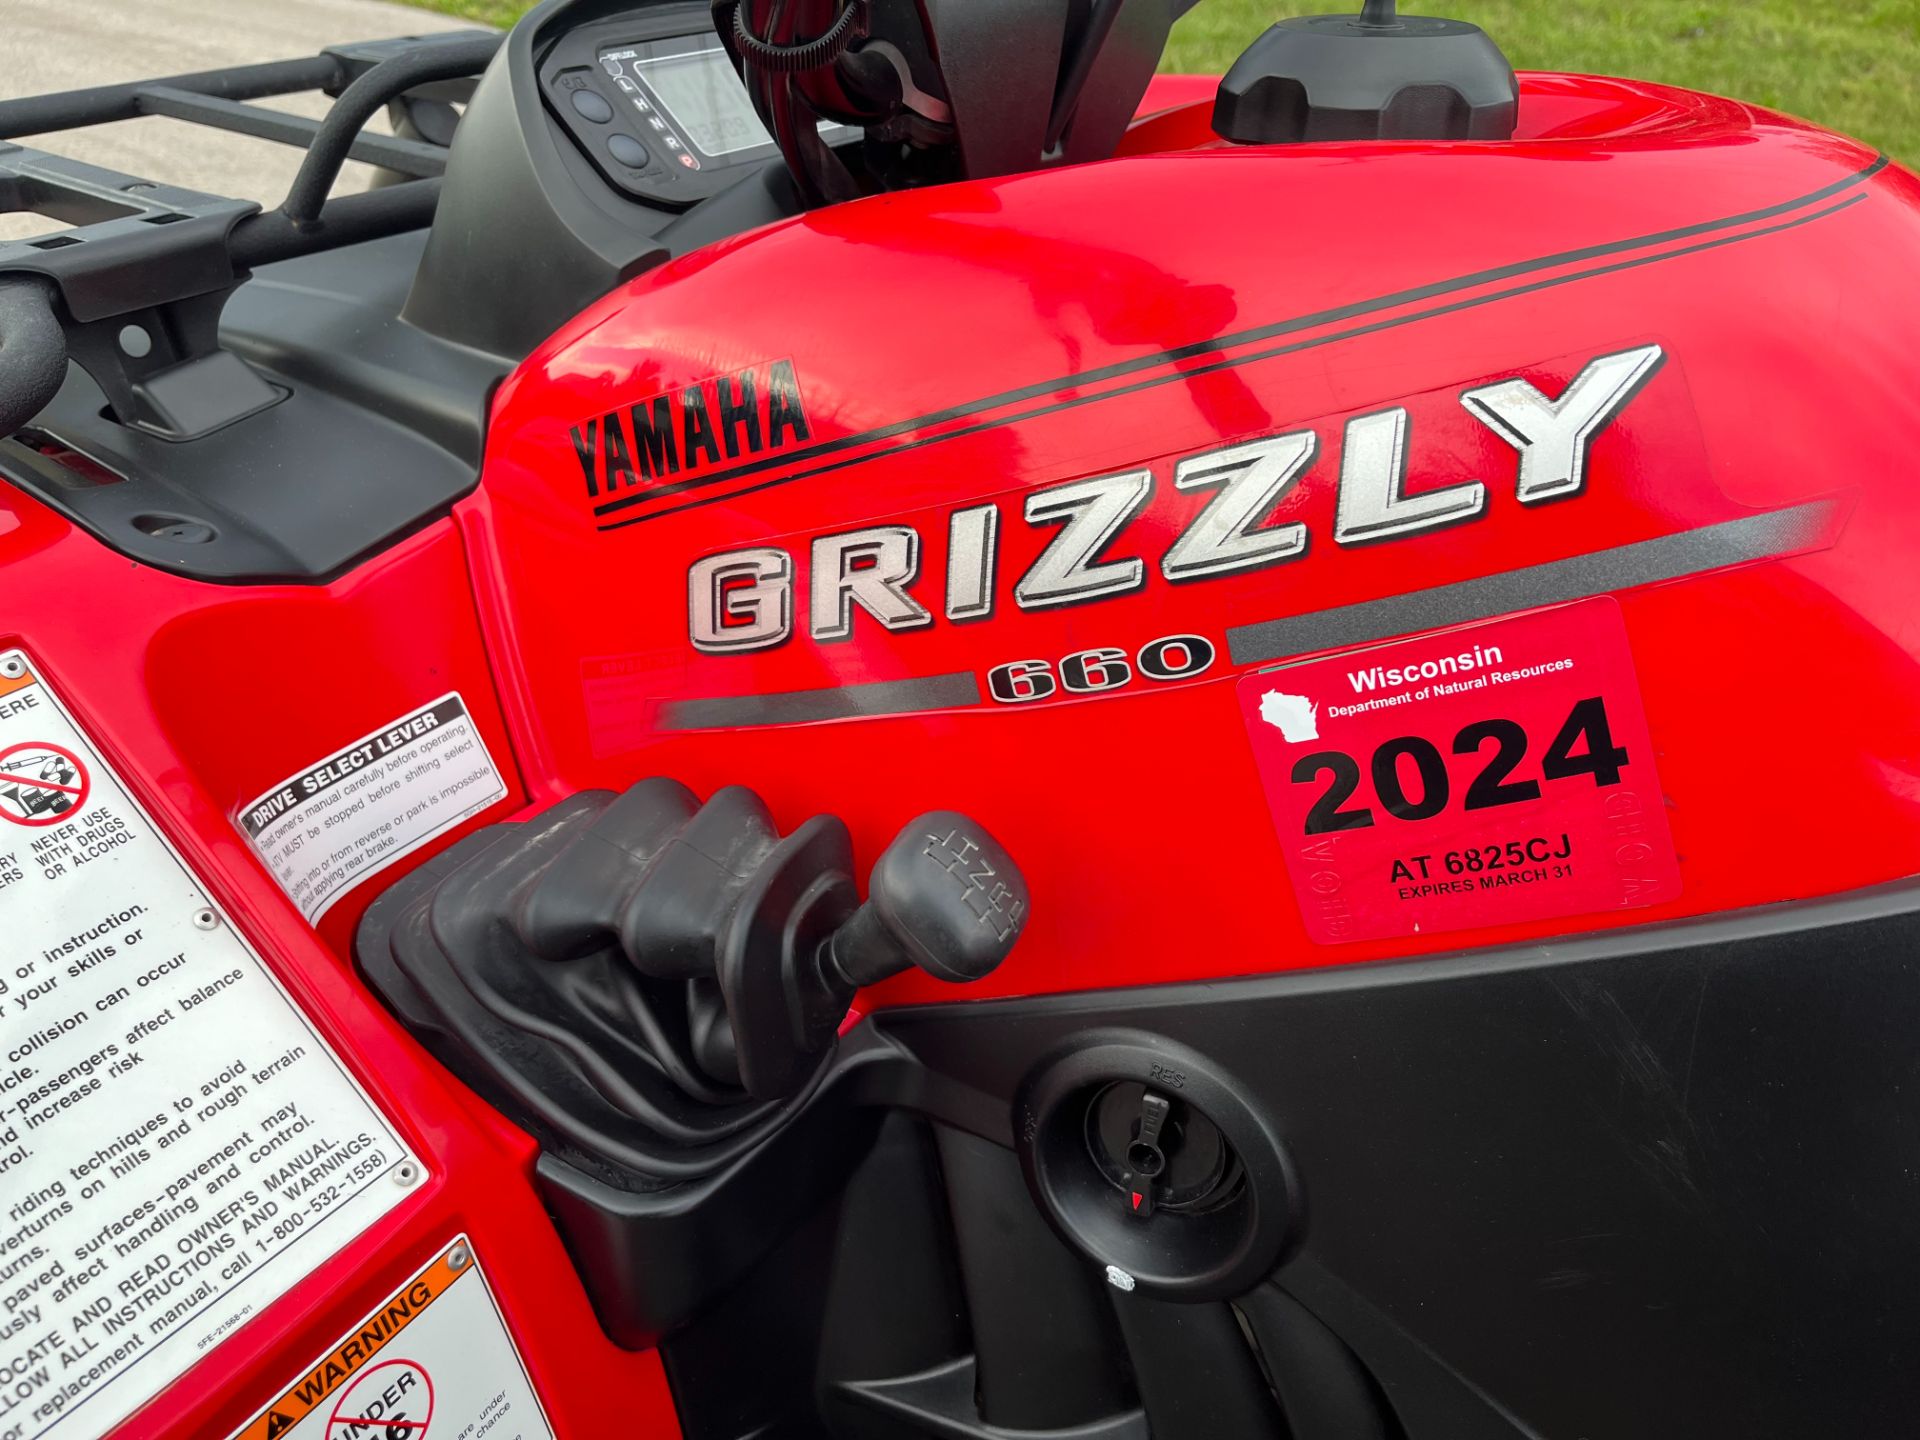 2004 Yamaha Grizzly 660 in Belvidere, Illinois - Photo 8